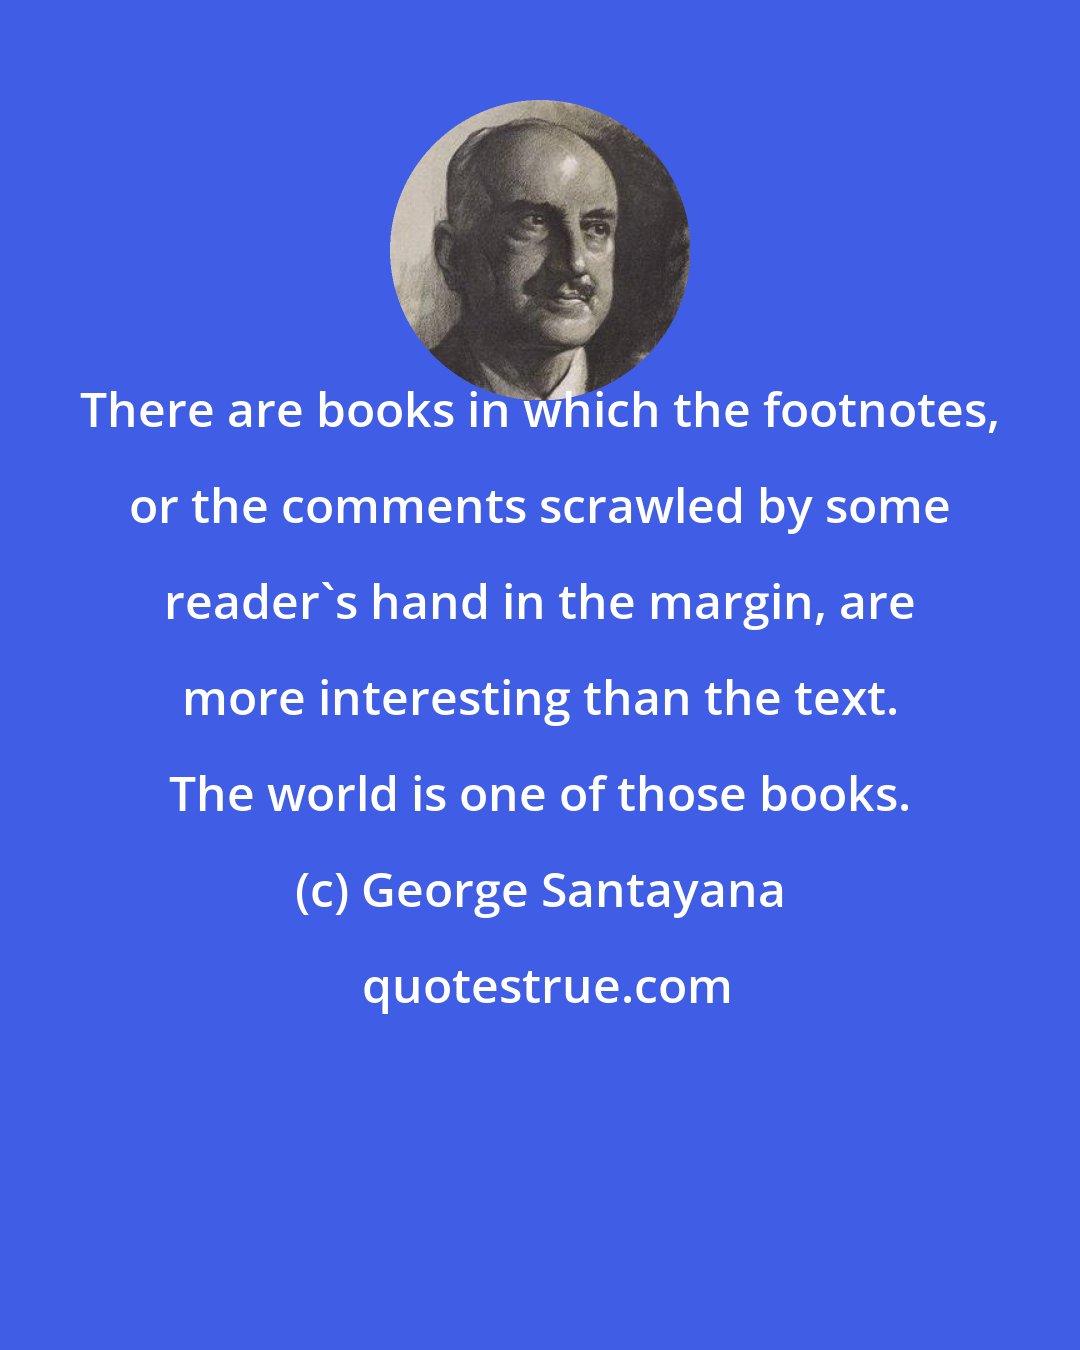 George Santayana: There are books in which the footnotes, or the comments scrawled by some reader's hand in the margin, are more interesting than the text. The world is one of those books.